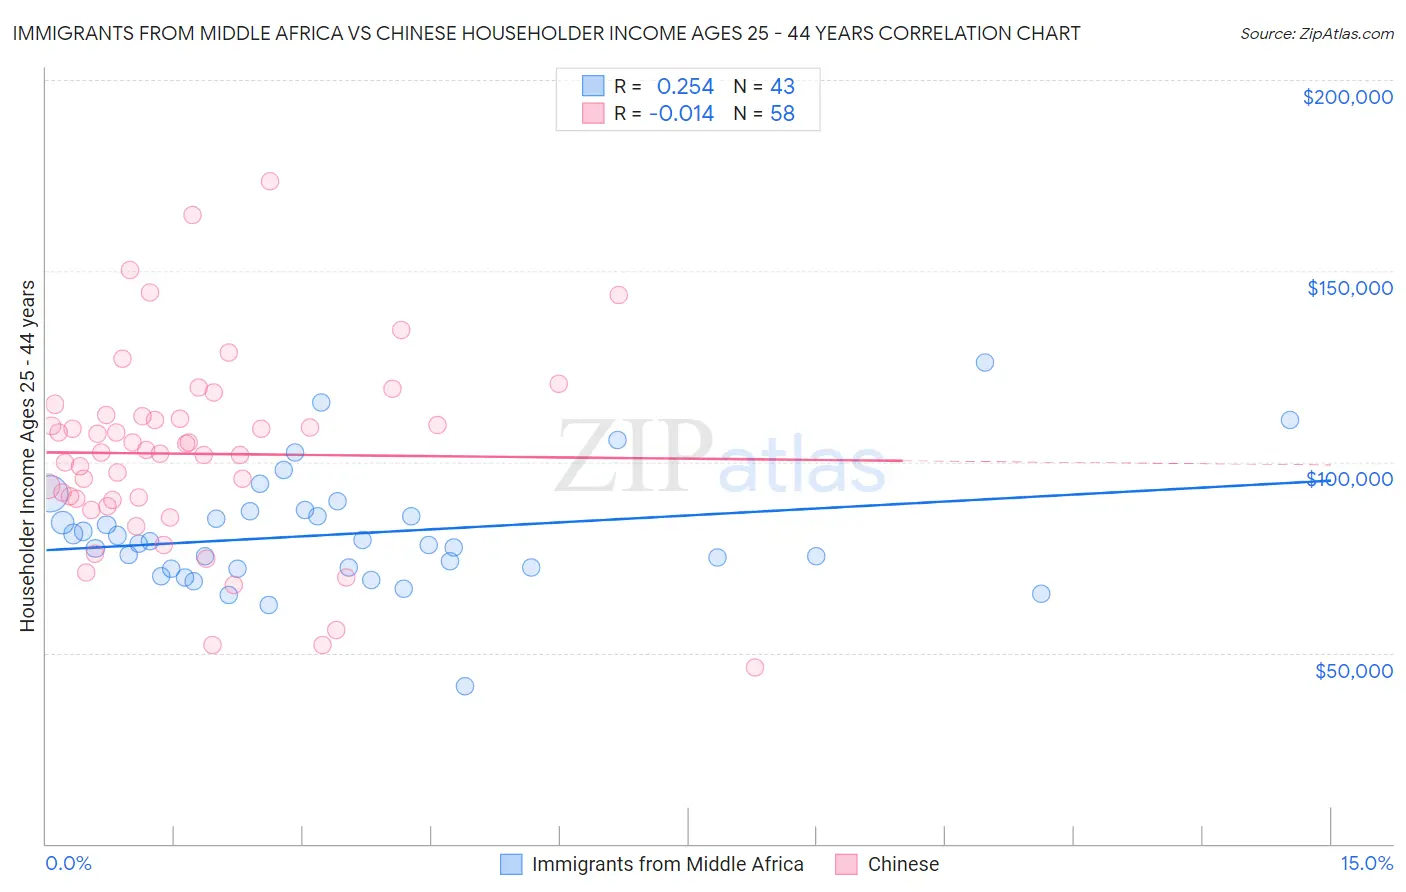 Immigrants from Middle Africa vs Chinese Householder Income Ages 25 - 44 years